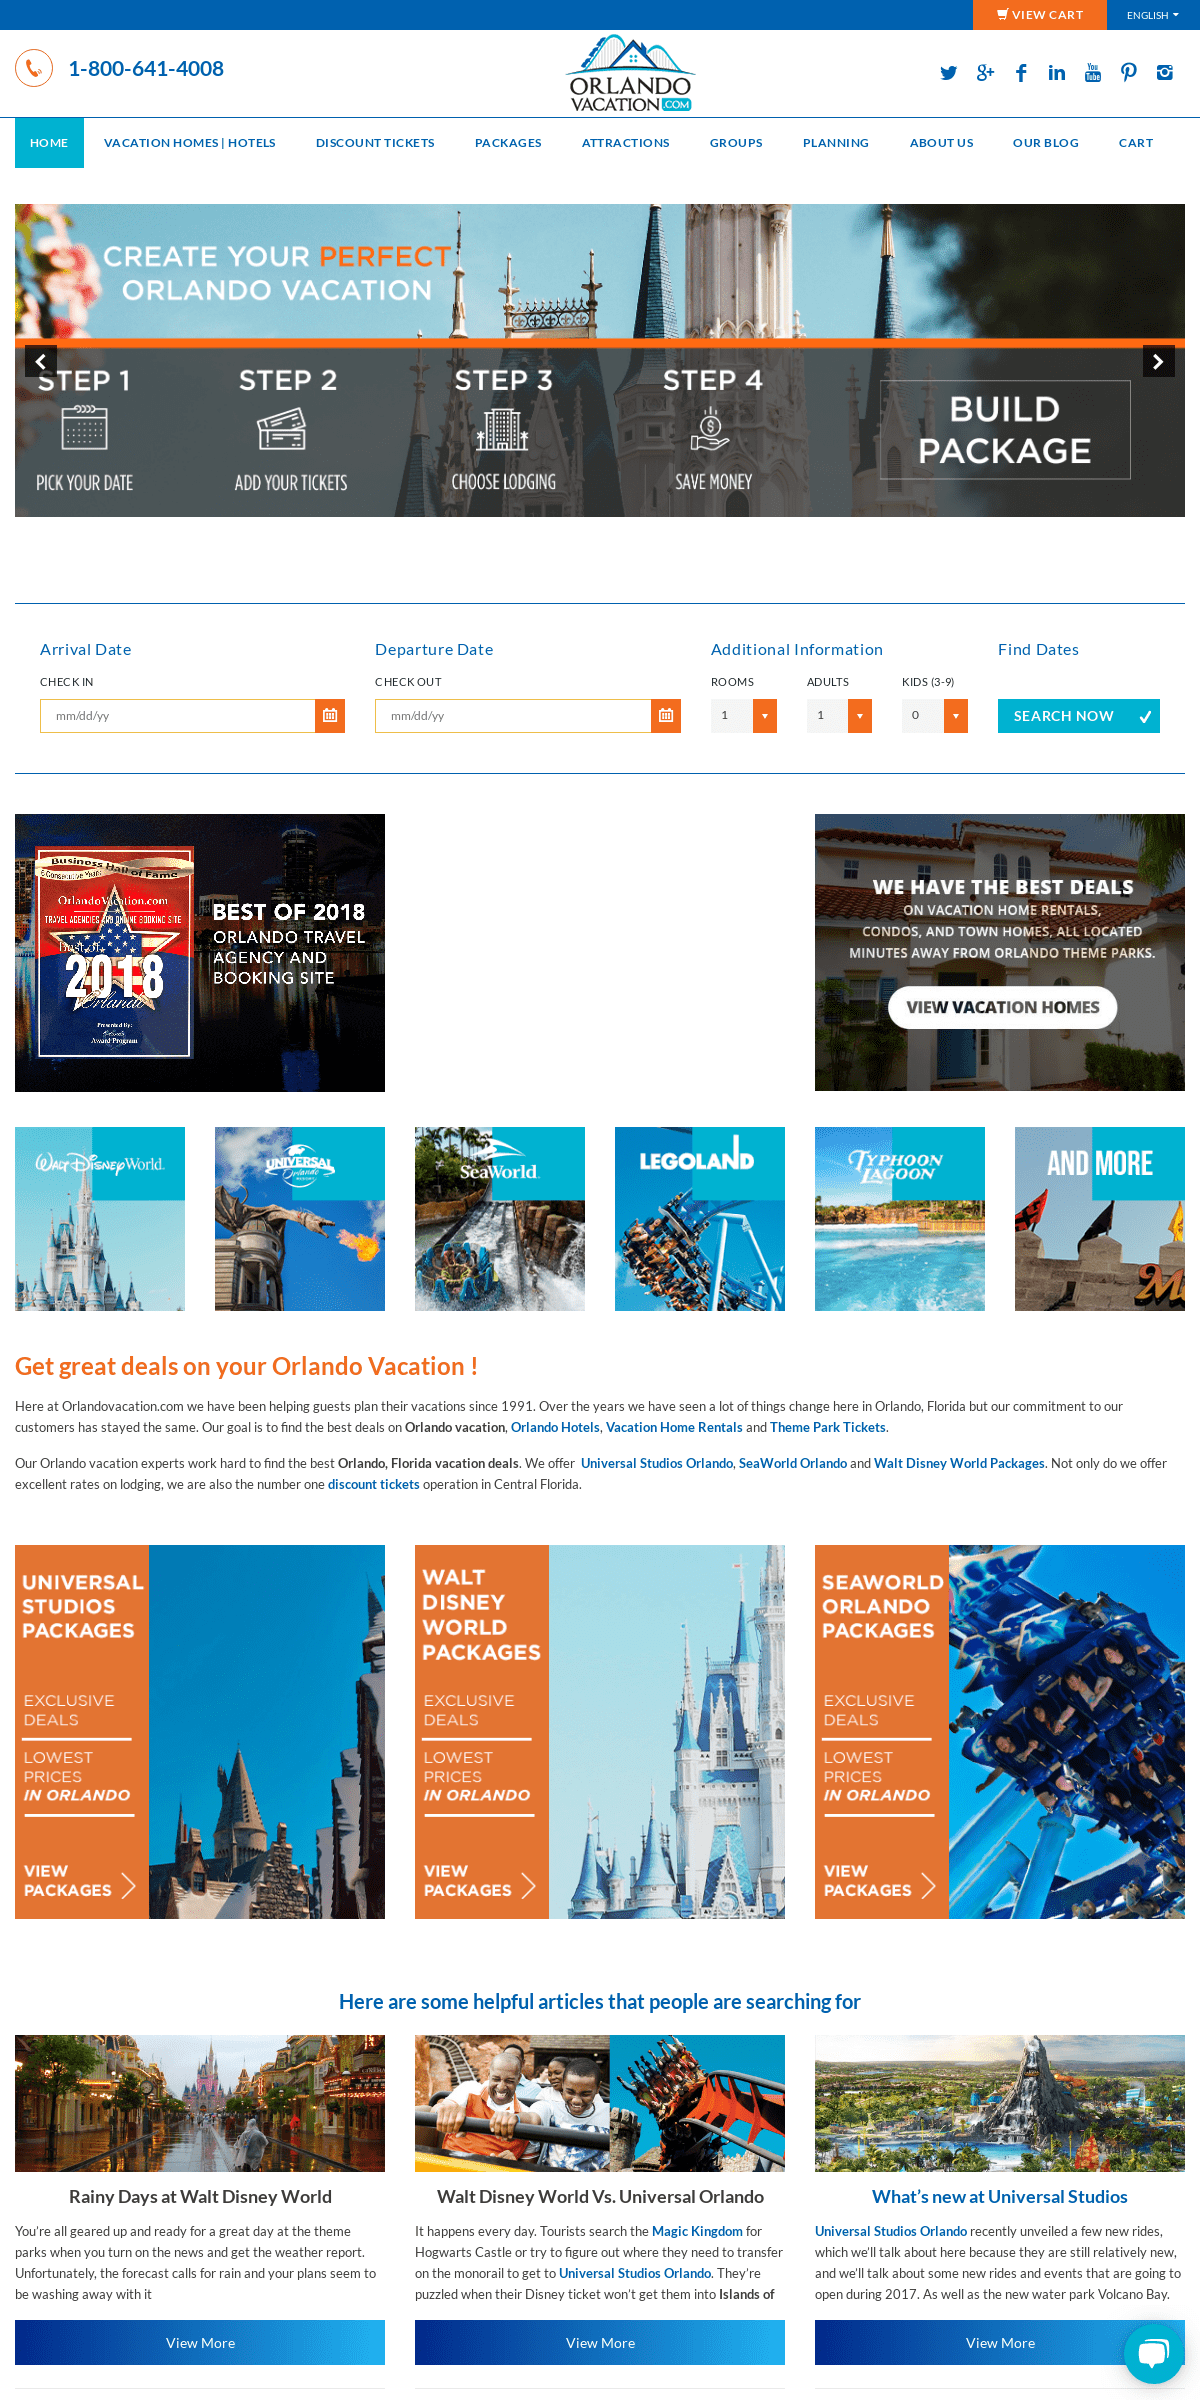 A complete backup of orlandovacation.com